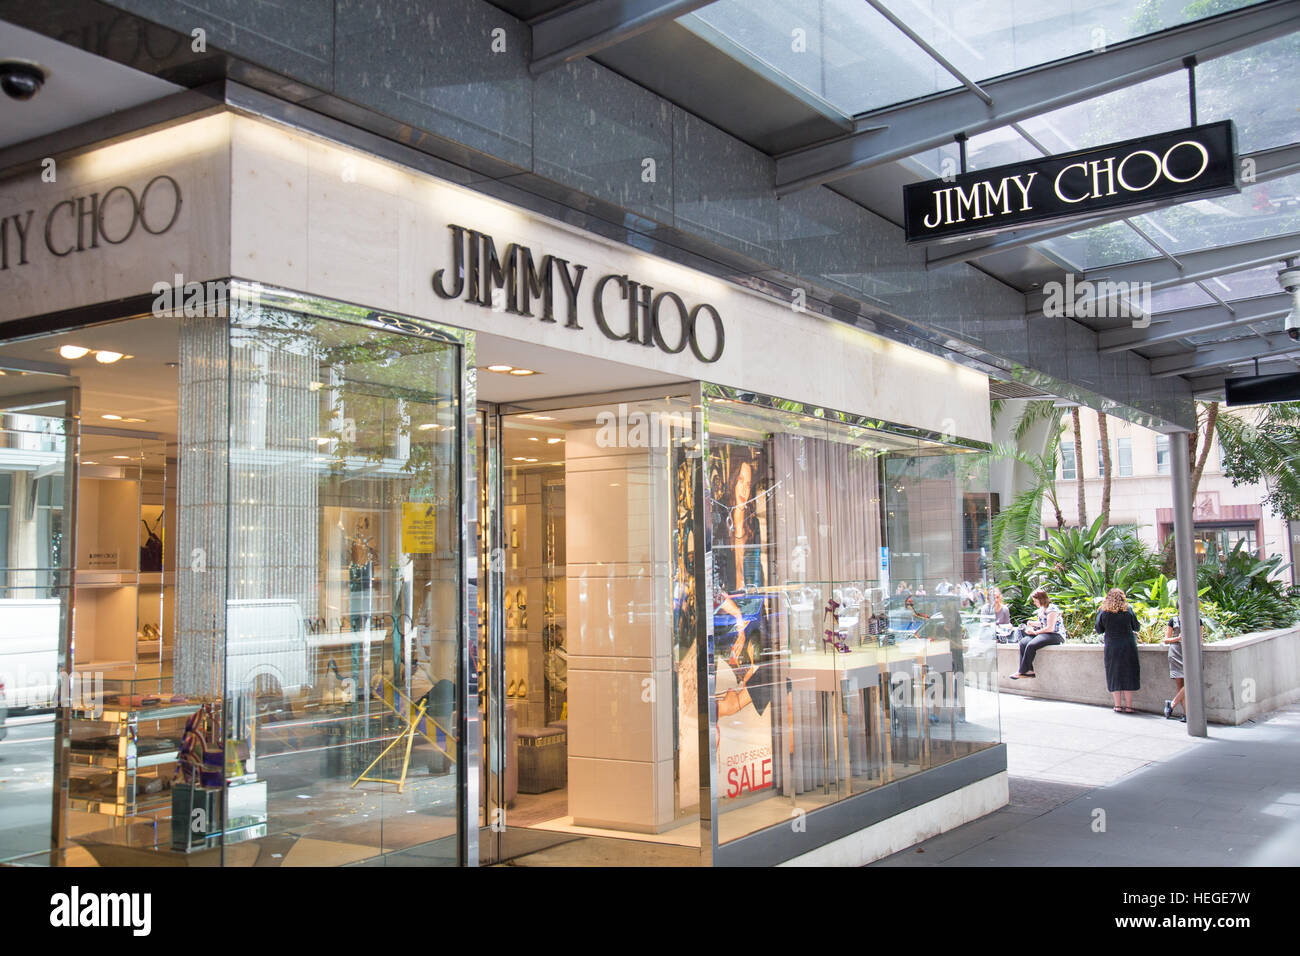 A Guide On How To Spot A Fake Jimmy Choo Handbag | vlr.eng.br